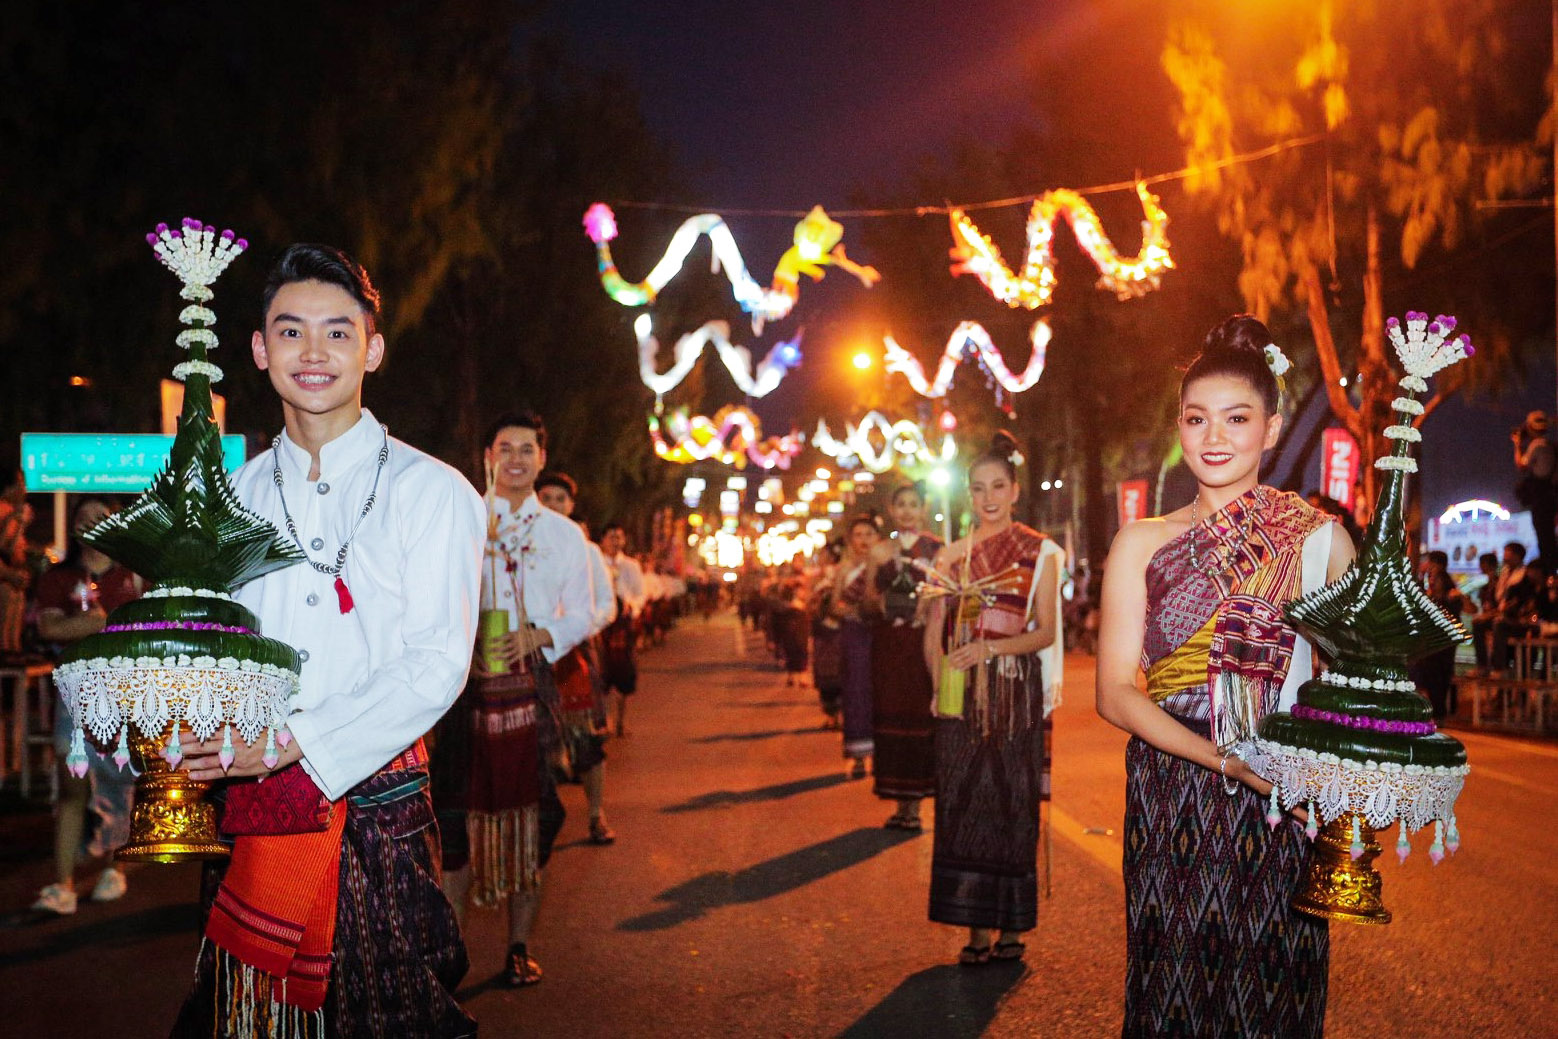 People walking in a local festival in Khon Kaen, Thailand.